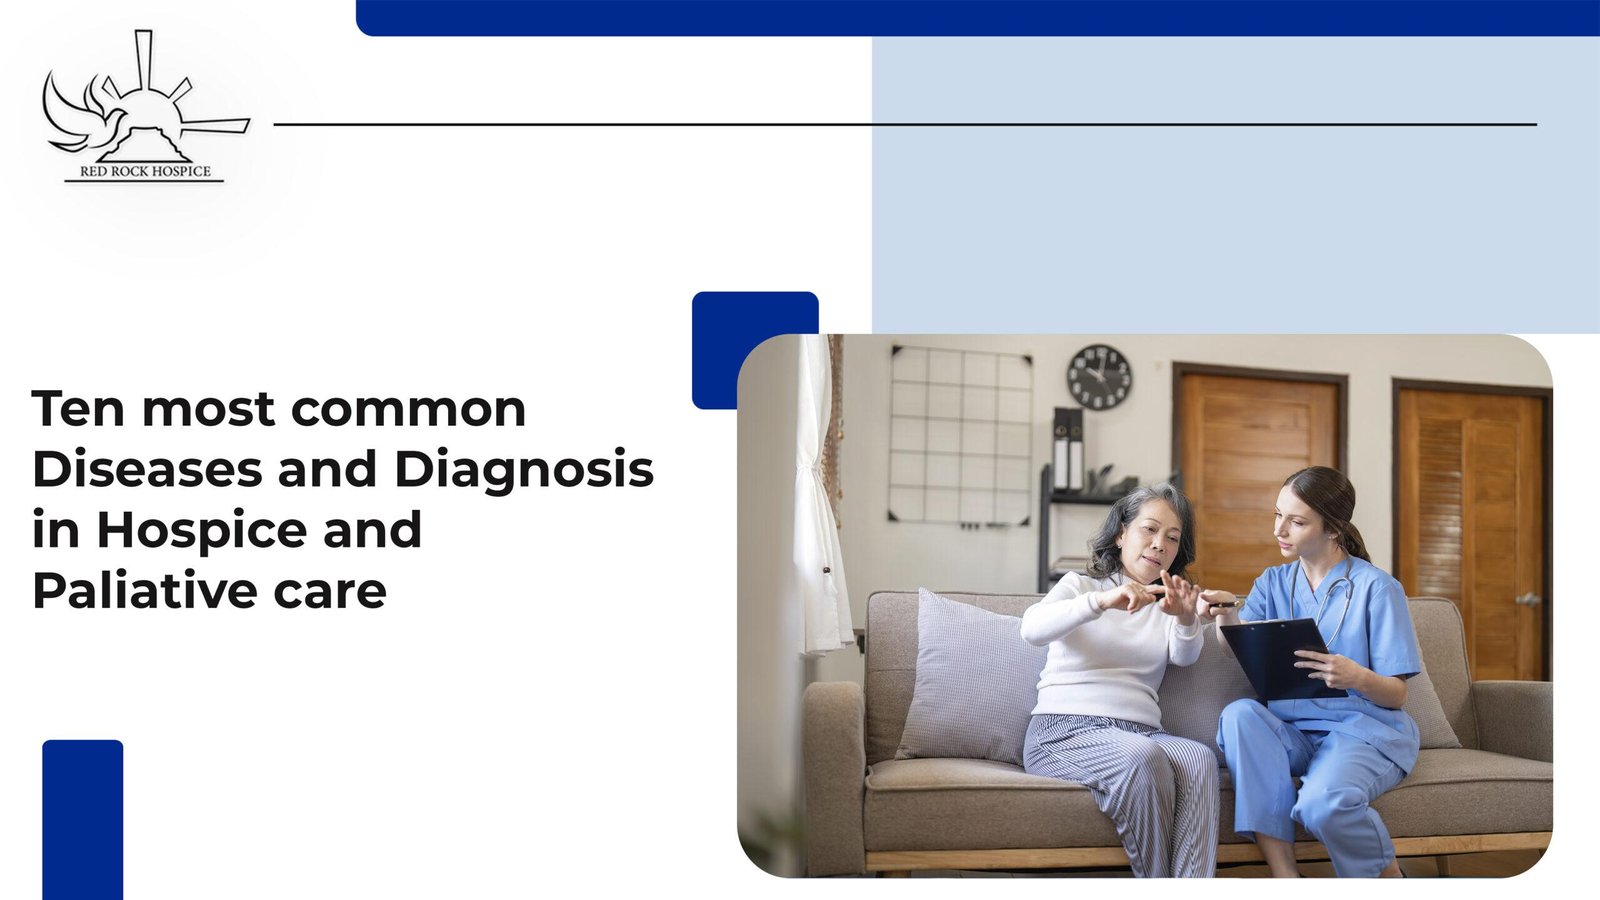 Ten most common Diseases and Diagnosis in Palliative care